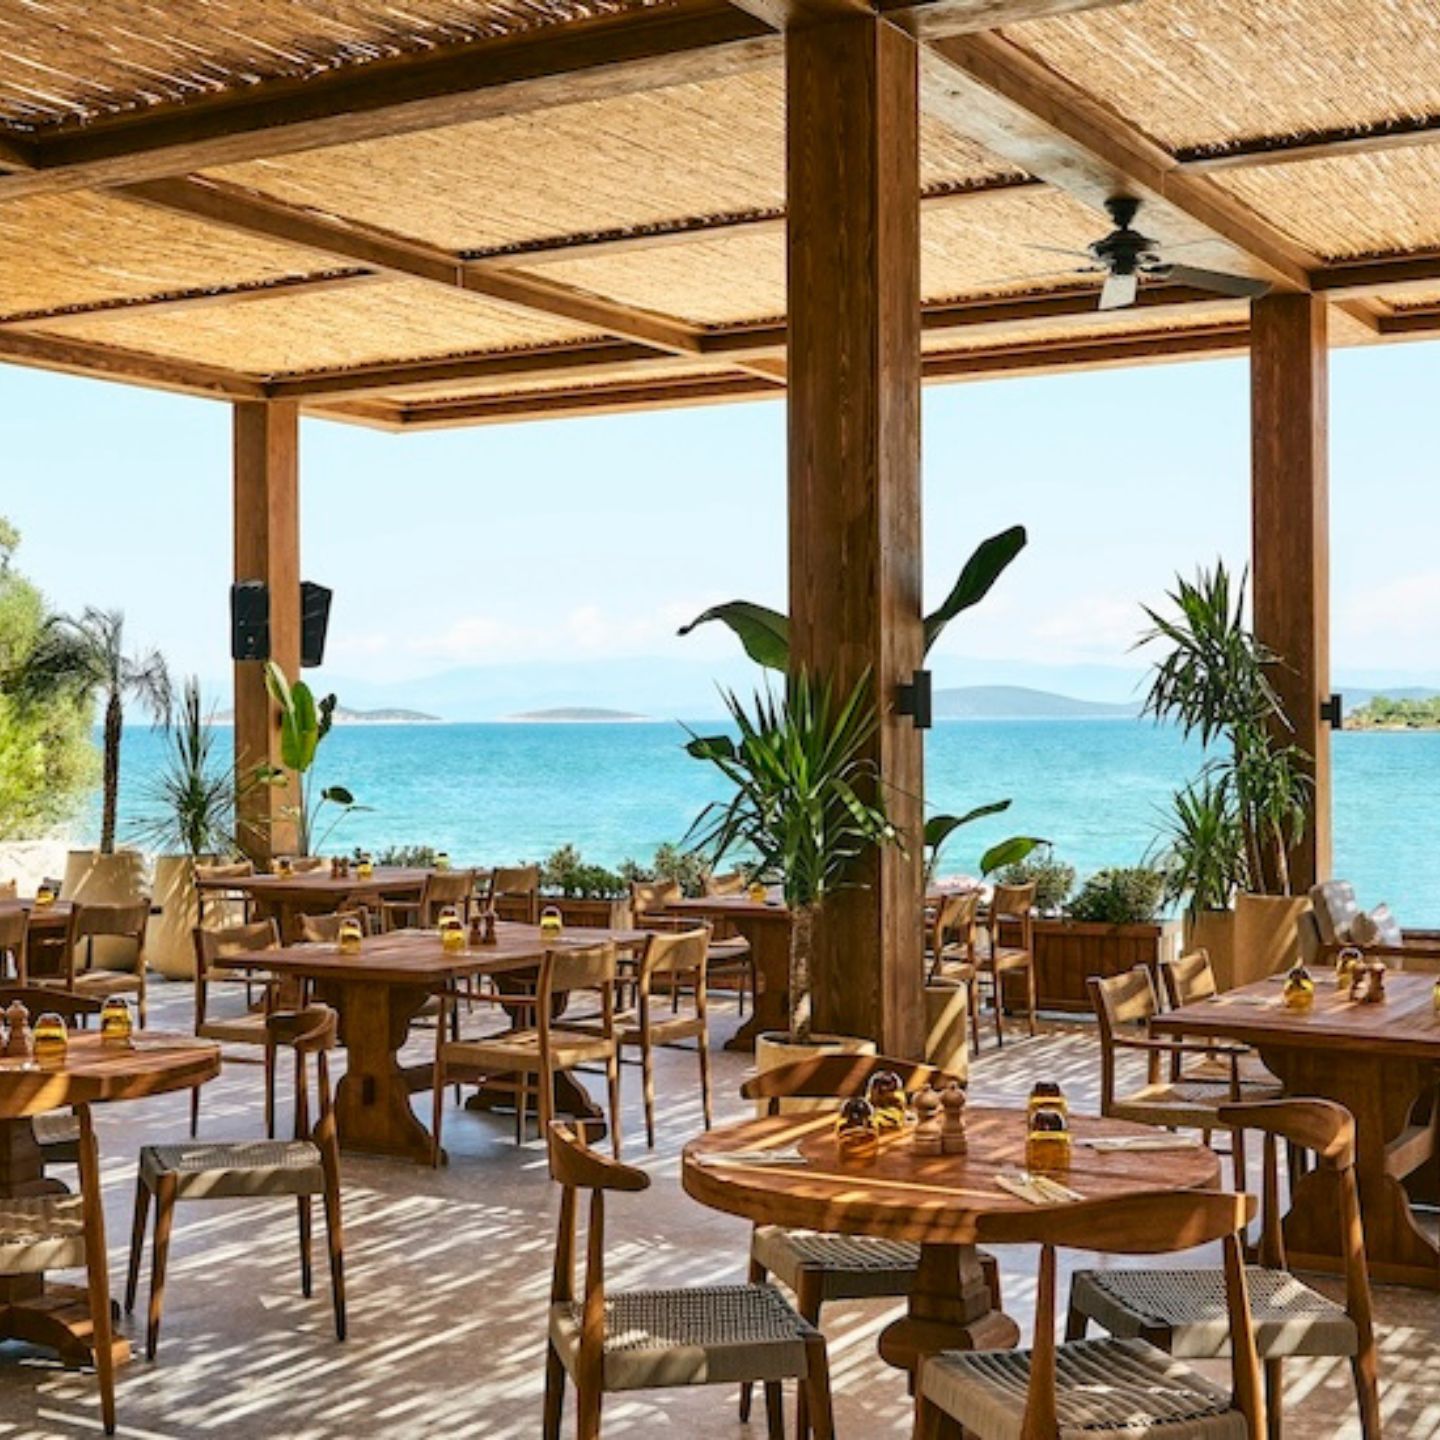 Beachside restaurant with wooden tables, wooden chairs, and palm trees with overhead patio roof